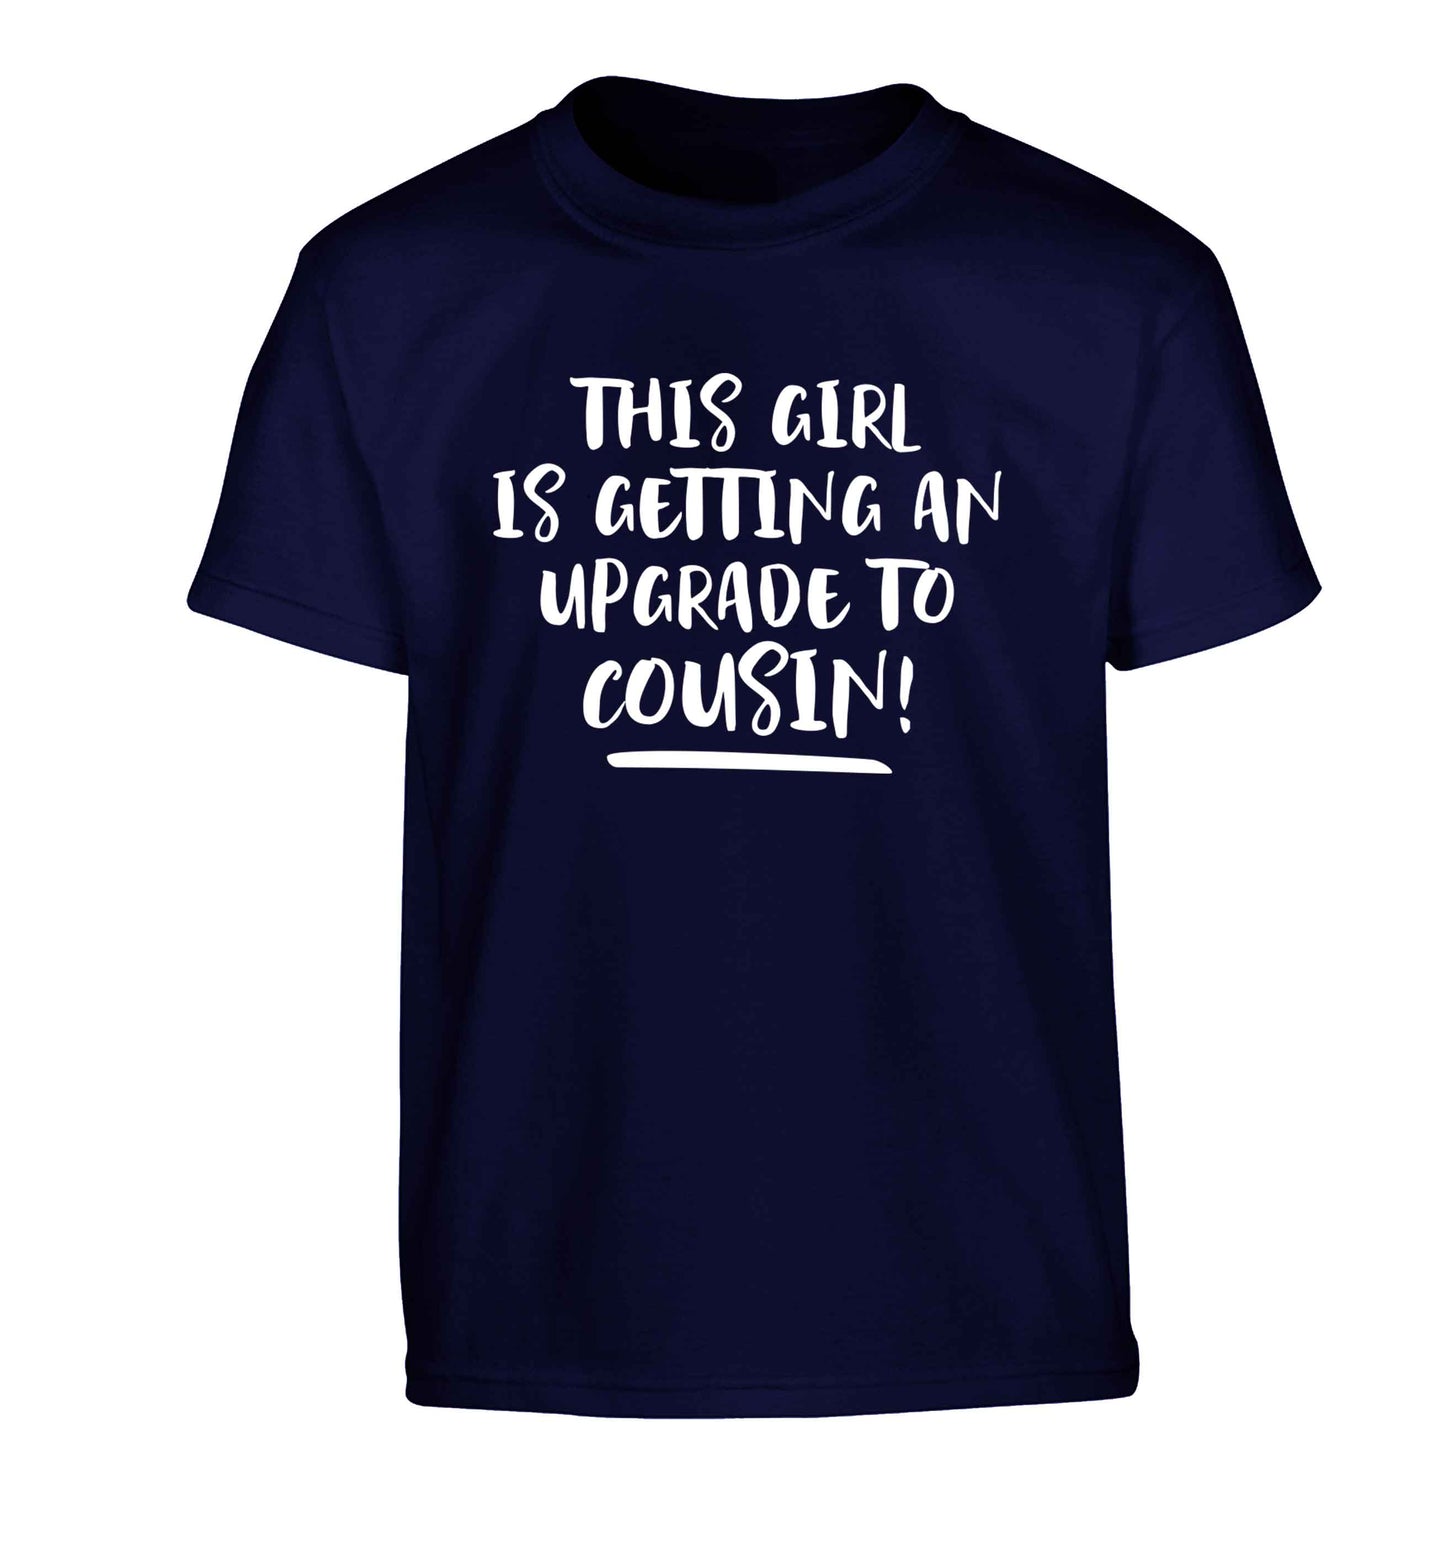 This girl is getting an upgrade to cousin! Children's navy Tshirt 12-13 Years